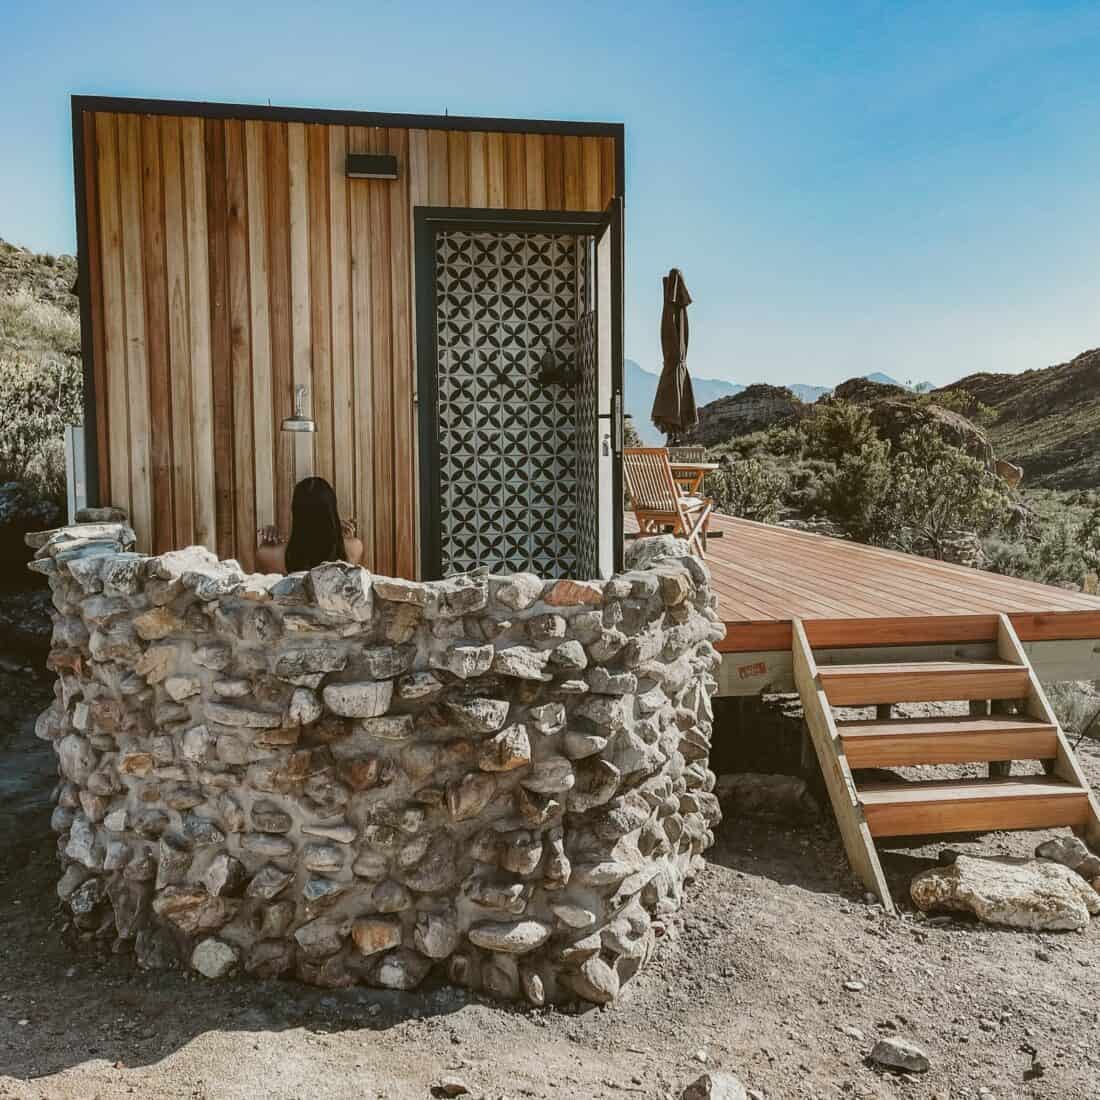 A rustic stone and wood cabin with a dark metal door, surrounded by rocky terrain under a clear blue sky, featuring outdoor shower ideas with a wooden deck and stairs on the right.